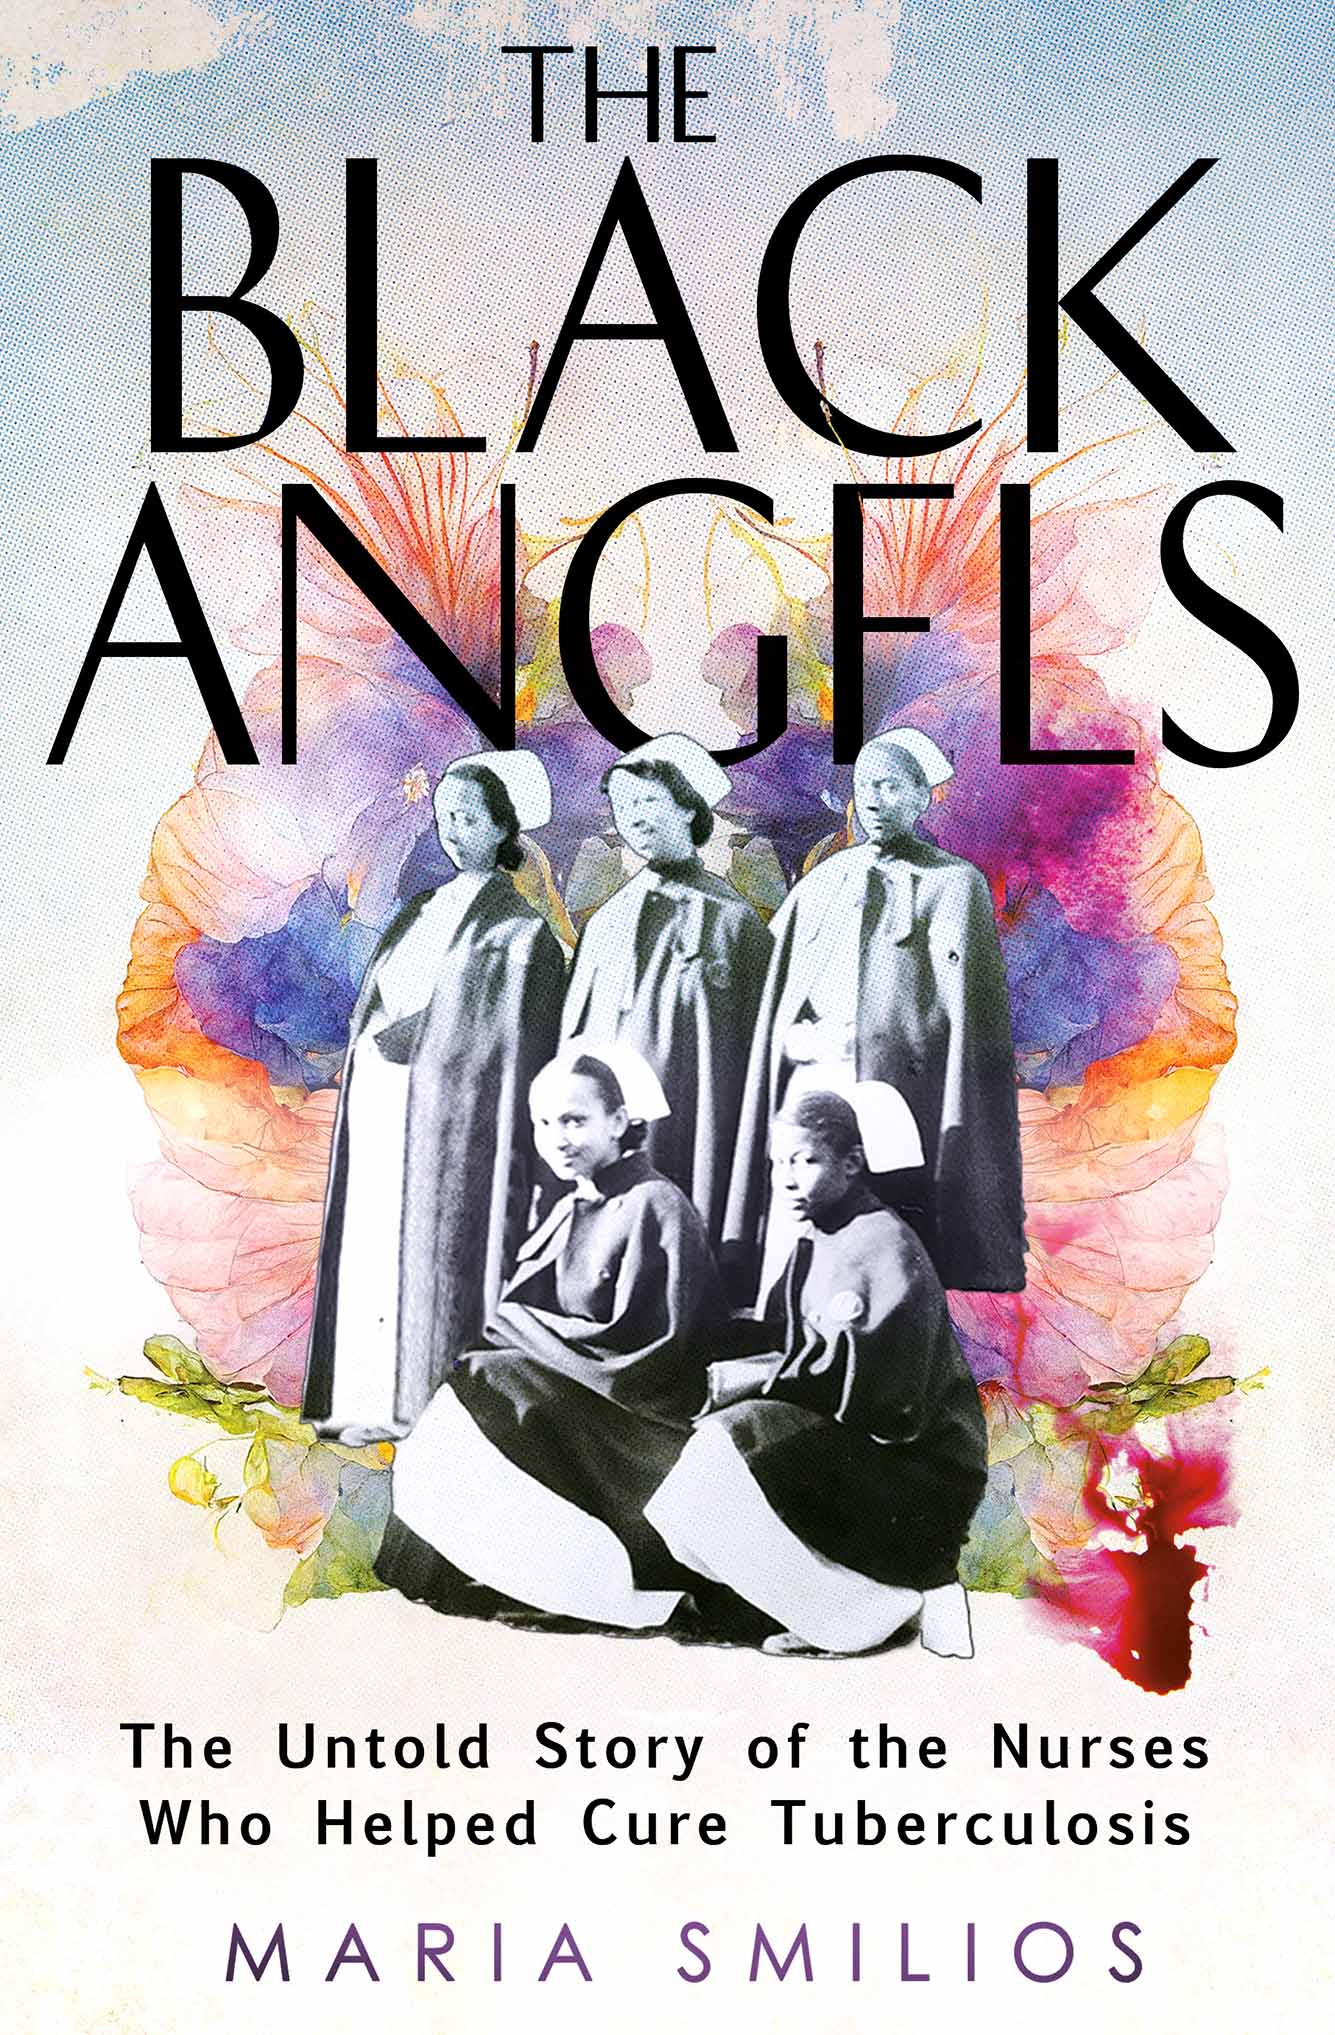 Photo: Cover of The Black Angels book with a watercolor background and five Black woman on the cover.